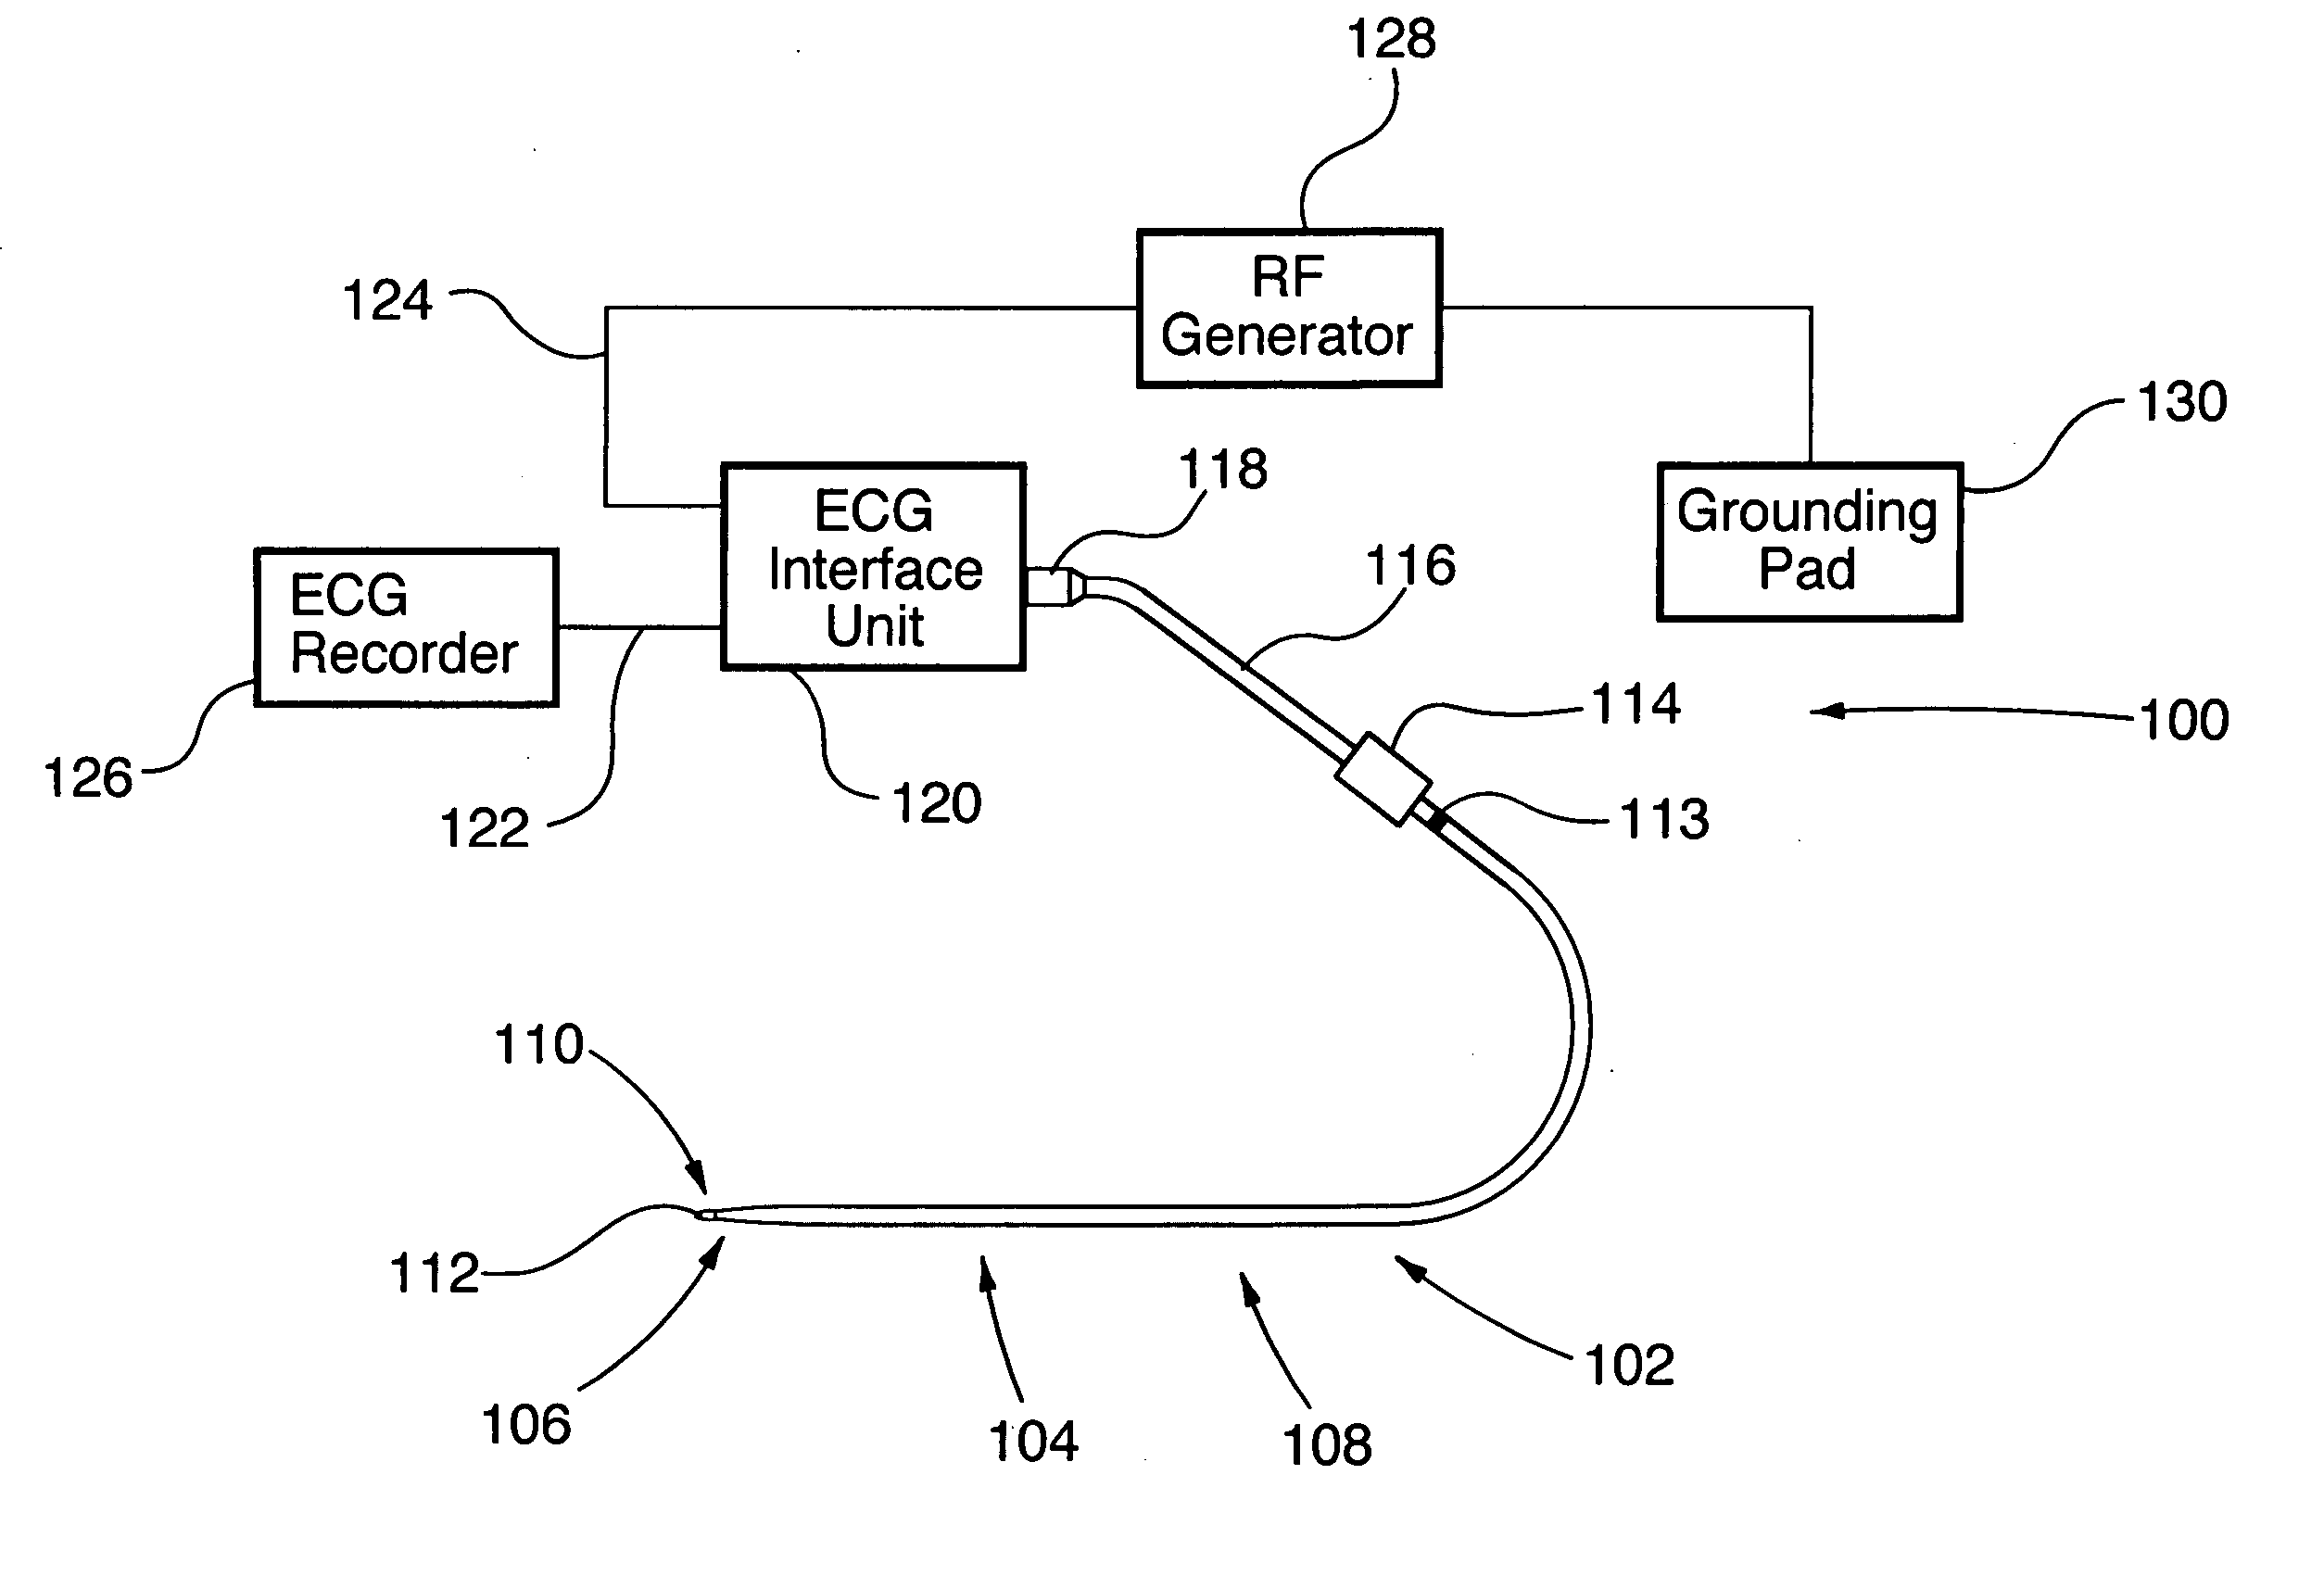 Surgical perforation device with electrocardiogram (ECG) monitoring ability and method of using ECG to position a surgical perforation device